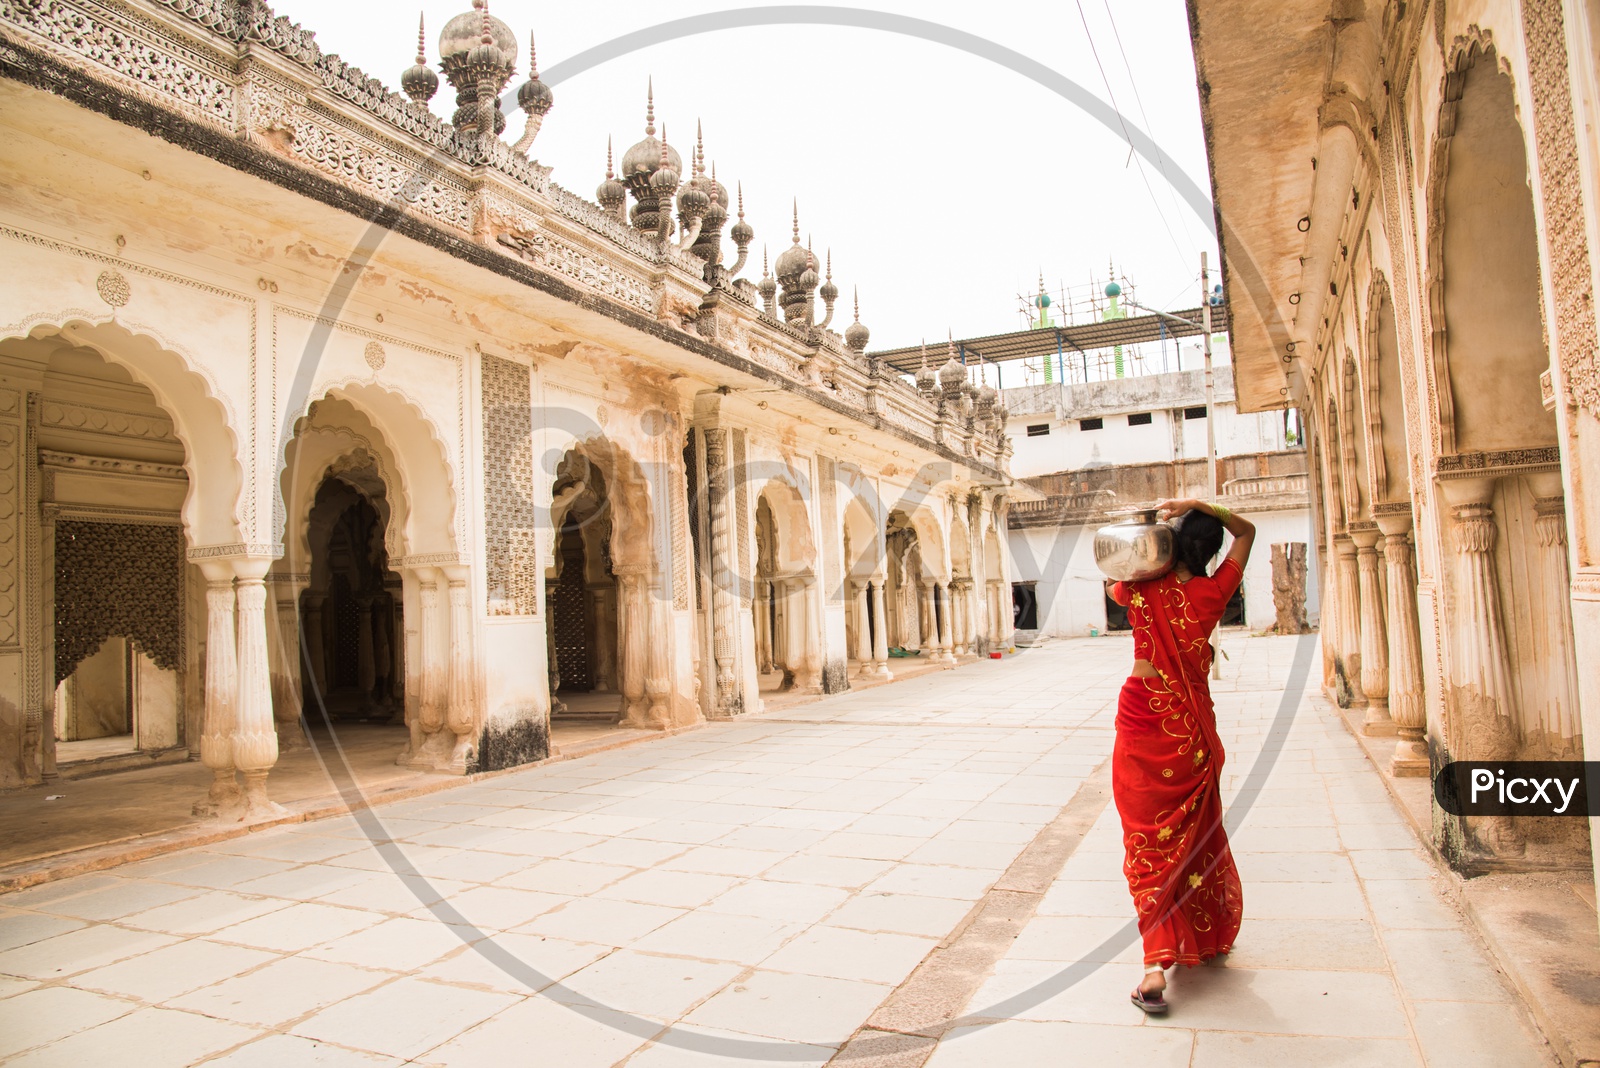 A women carrying water for their household needs at Paigah tombs.